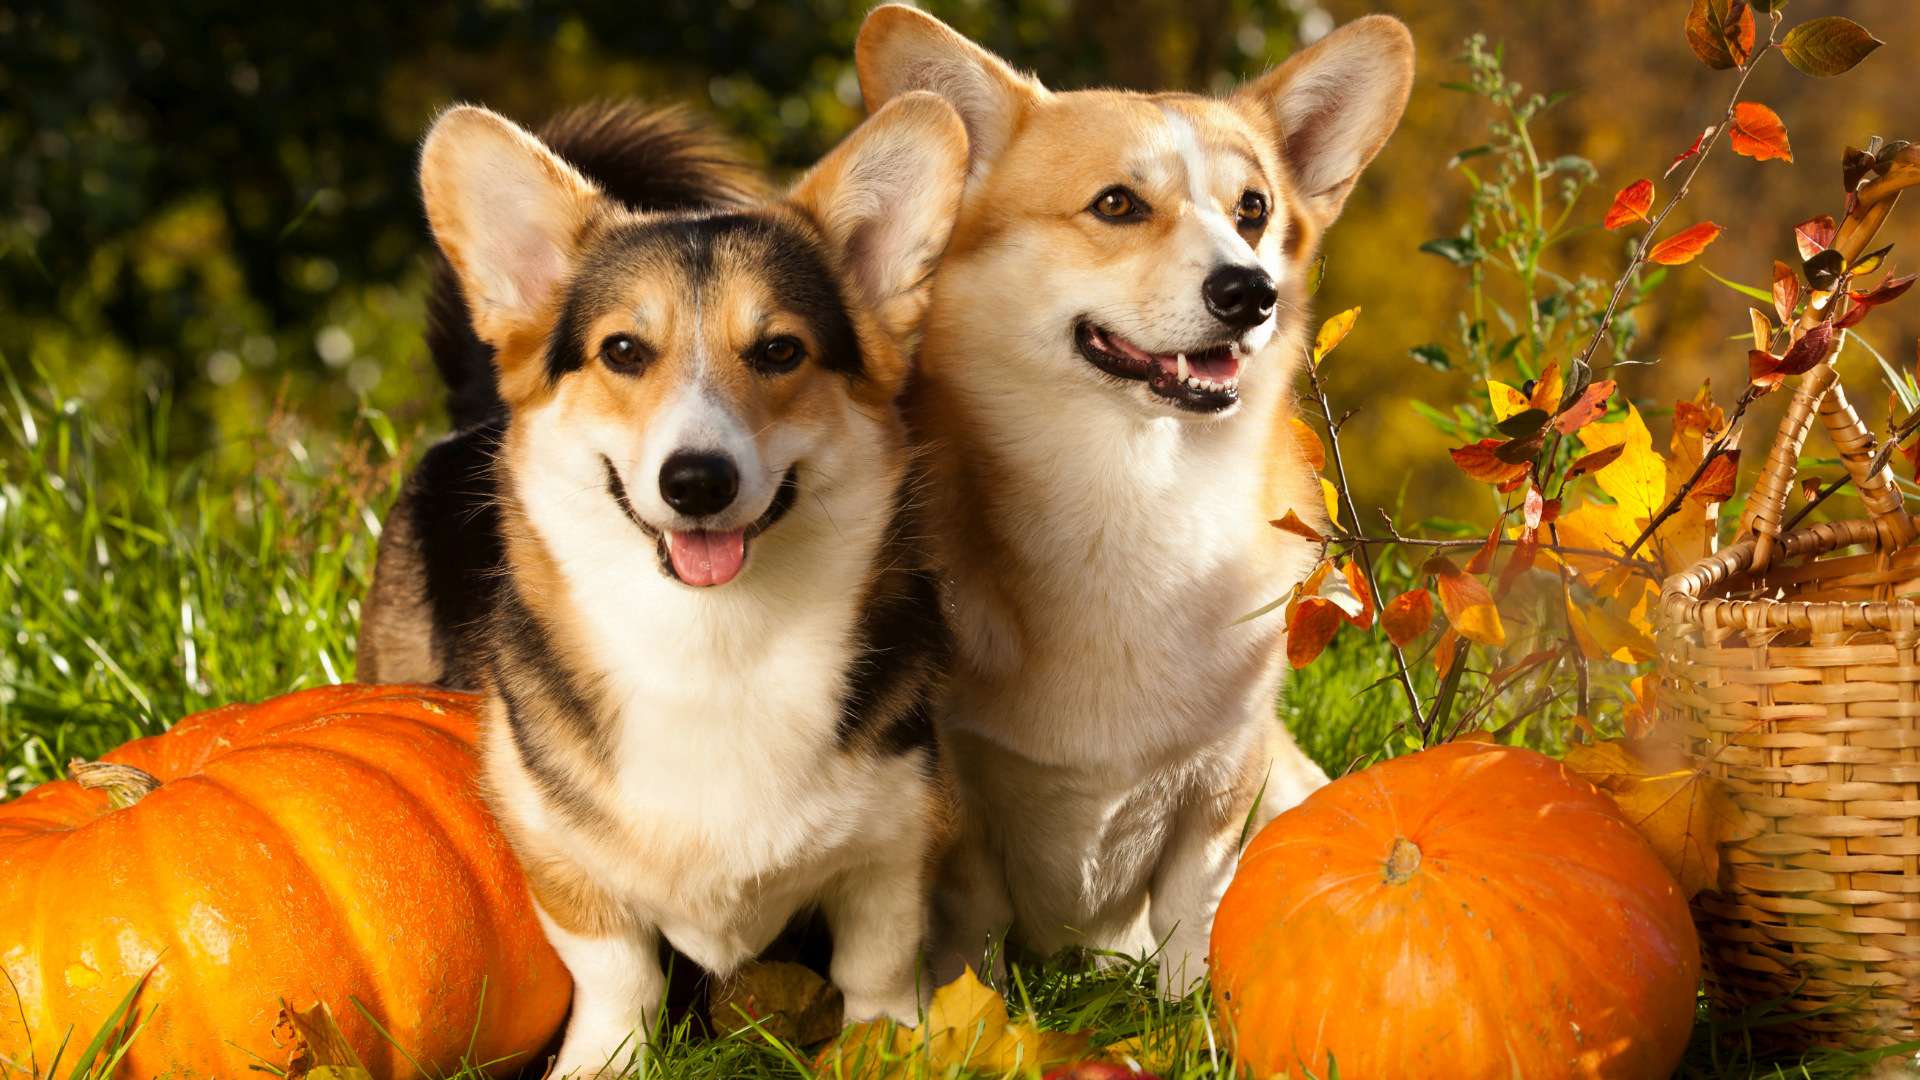 Dogs and pumpkin